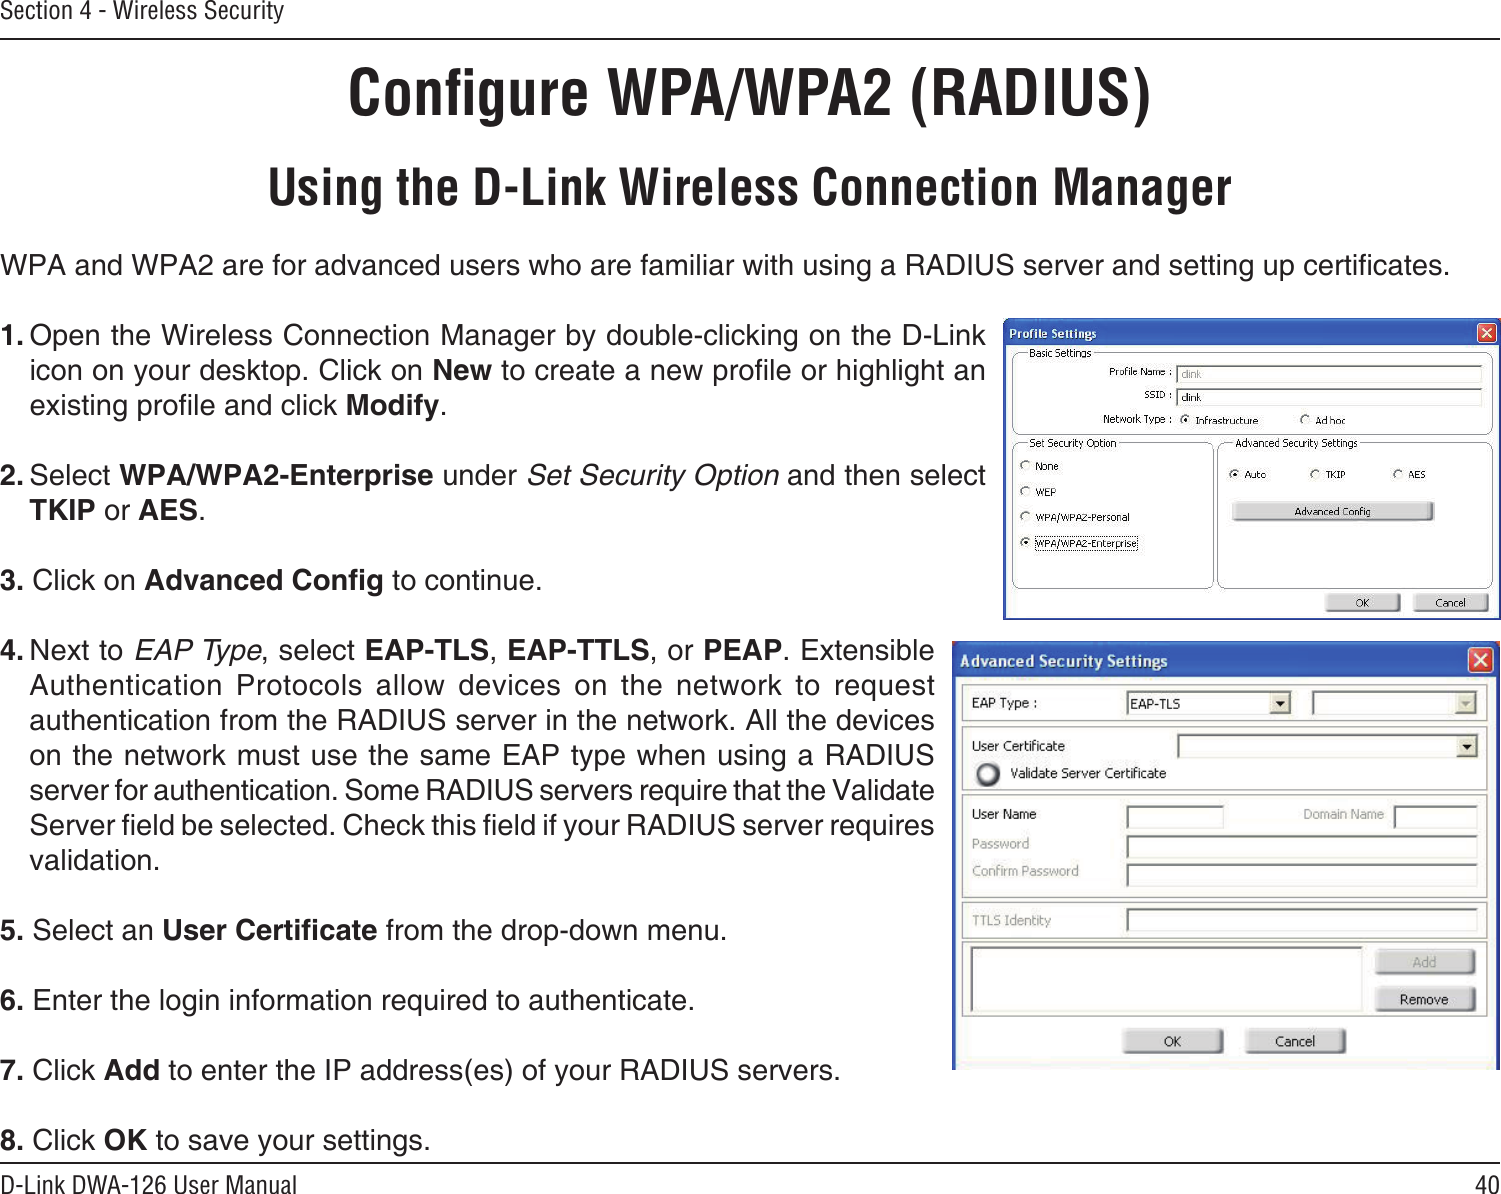 40D-Link DWA-126 User ManualSection 4 - Wireless SecurityConﬁgure WPA/WPA2 (RADIUS)Using the D-Link Wireless Connection ManagerWPA and WPA2 are for advanced users who are familiar with using a RADIUS server and setting up certicates.1. Open the Wireless Connection Manager by double-clicking on the D-Link icon on your desktop. Click on New to create a new prole or highlight an existing prole and click Modify. 2. Select WPA/WPA2-Enterprise under Set Security Option and then select TKIP or AES.3. Click on Advanced Cong to continue.4. Next to EAP Type, select EAP-TLS, EAP-TTLS, or PEAP. Extensible Authentication  Protocols  allow  devices  on  the  network  to  request authentication from the RADIUS server in the network. All the devices on the network must use the same EAP type when using a RADIUS server for authentication. Some RADIUS servers require that the Validate Server eld be selected. Check this eld if your RADIUS server requires validation.5. Select an User Certicate from the drop-down menu.6. Enter the login information required to authenticate.7. Click Add to enter the IP address(es) of your RADIUS servers.8. Click OK to save your settings.